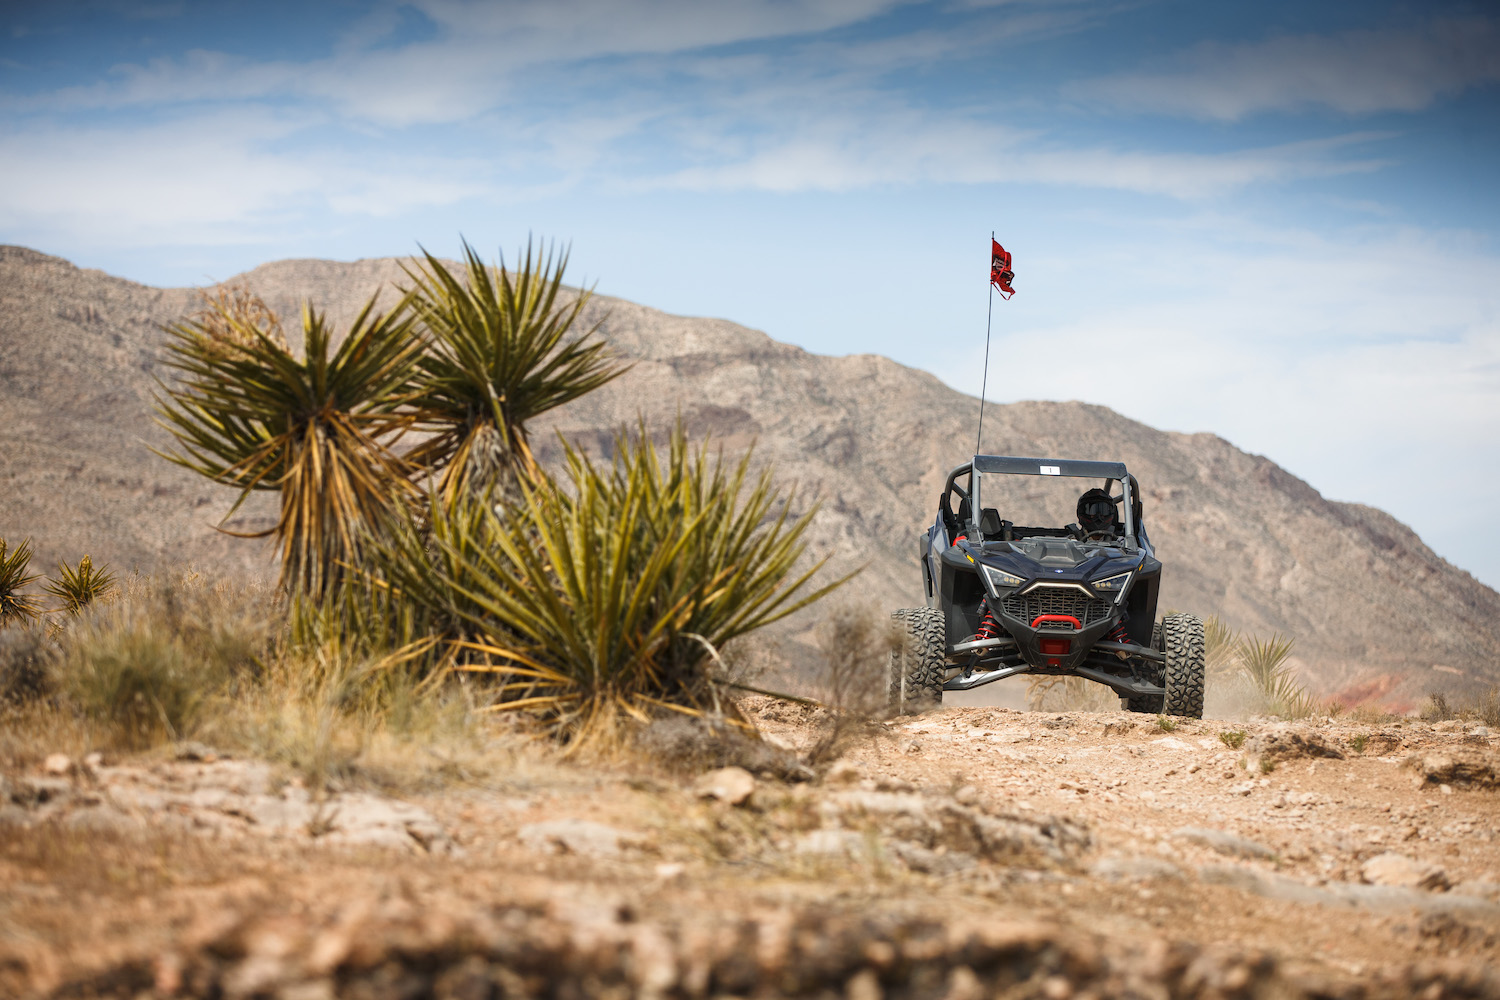 Polaris RZR Pro R in front of bushes in the desert with a mountain in the background.